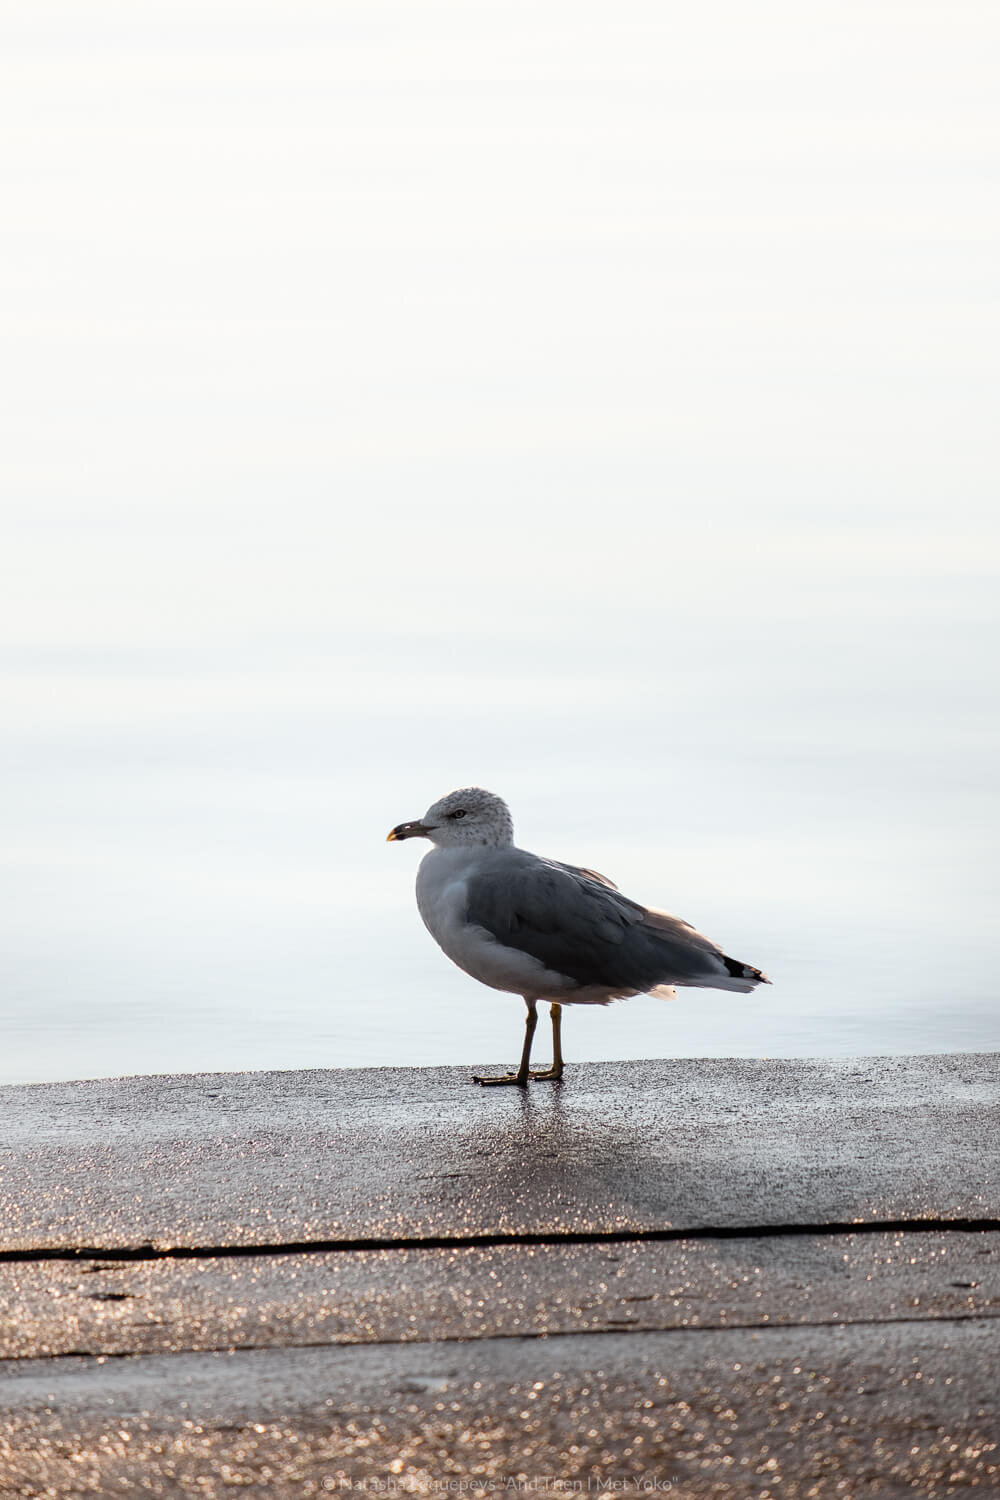 Seagull on Lakefront trail, Chicago, USA. Travel photography and guide by © Natasha Lequepeys for "And Then I Met Yoko". #chicago #usa #travelblog #travelphotography